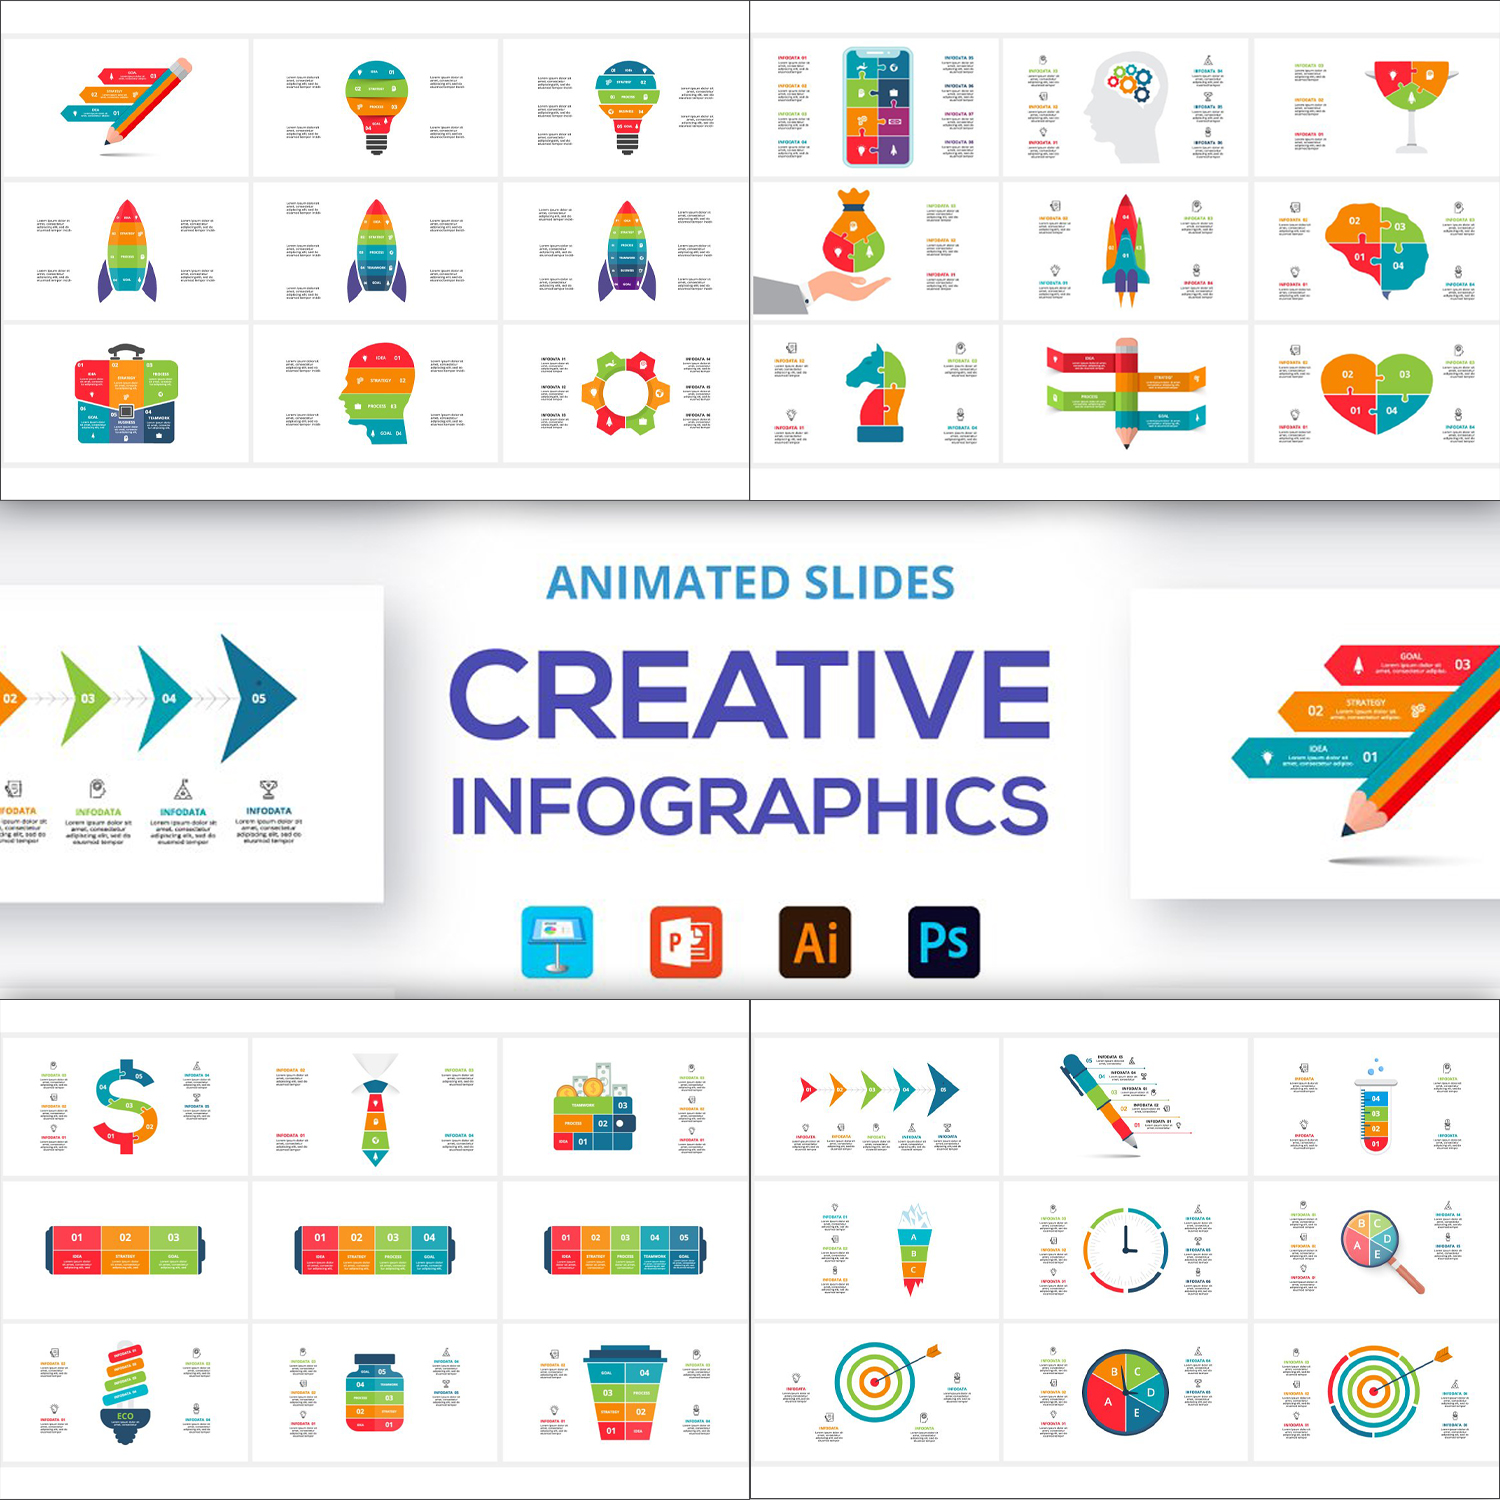 Creative animated infographics preview.